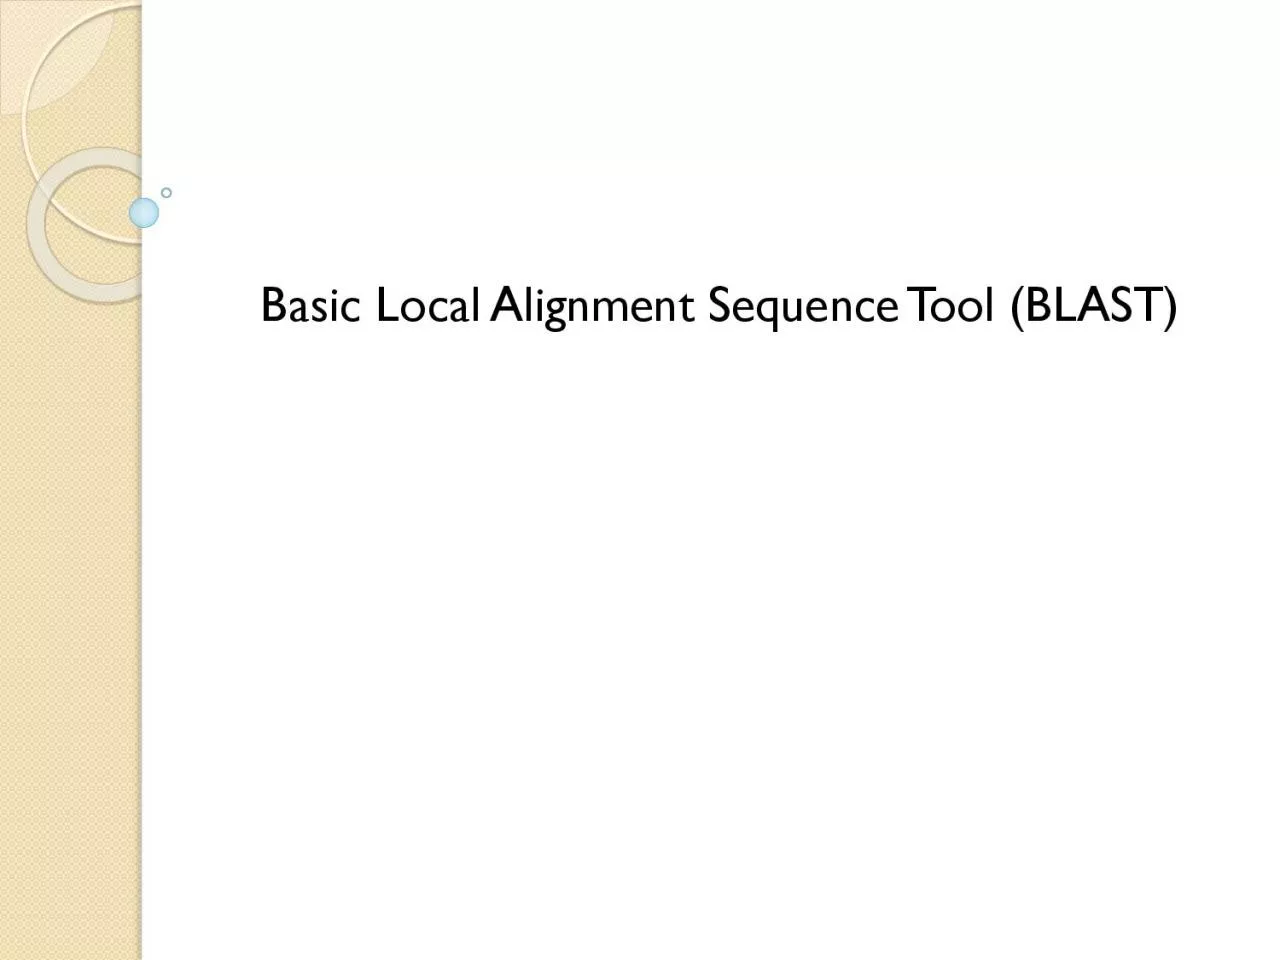 Basic Local Alignment Sequence Tool BLAST